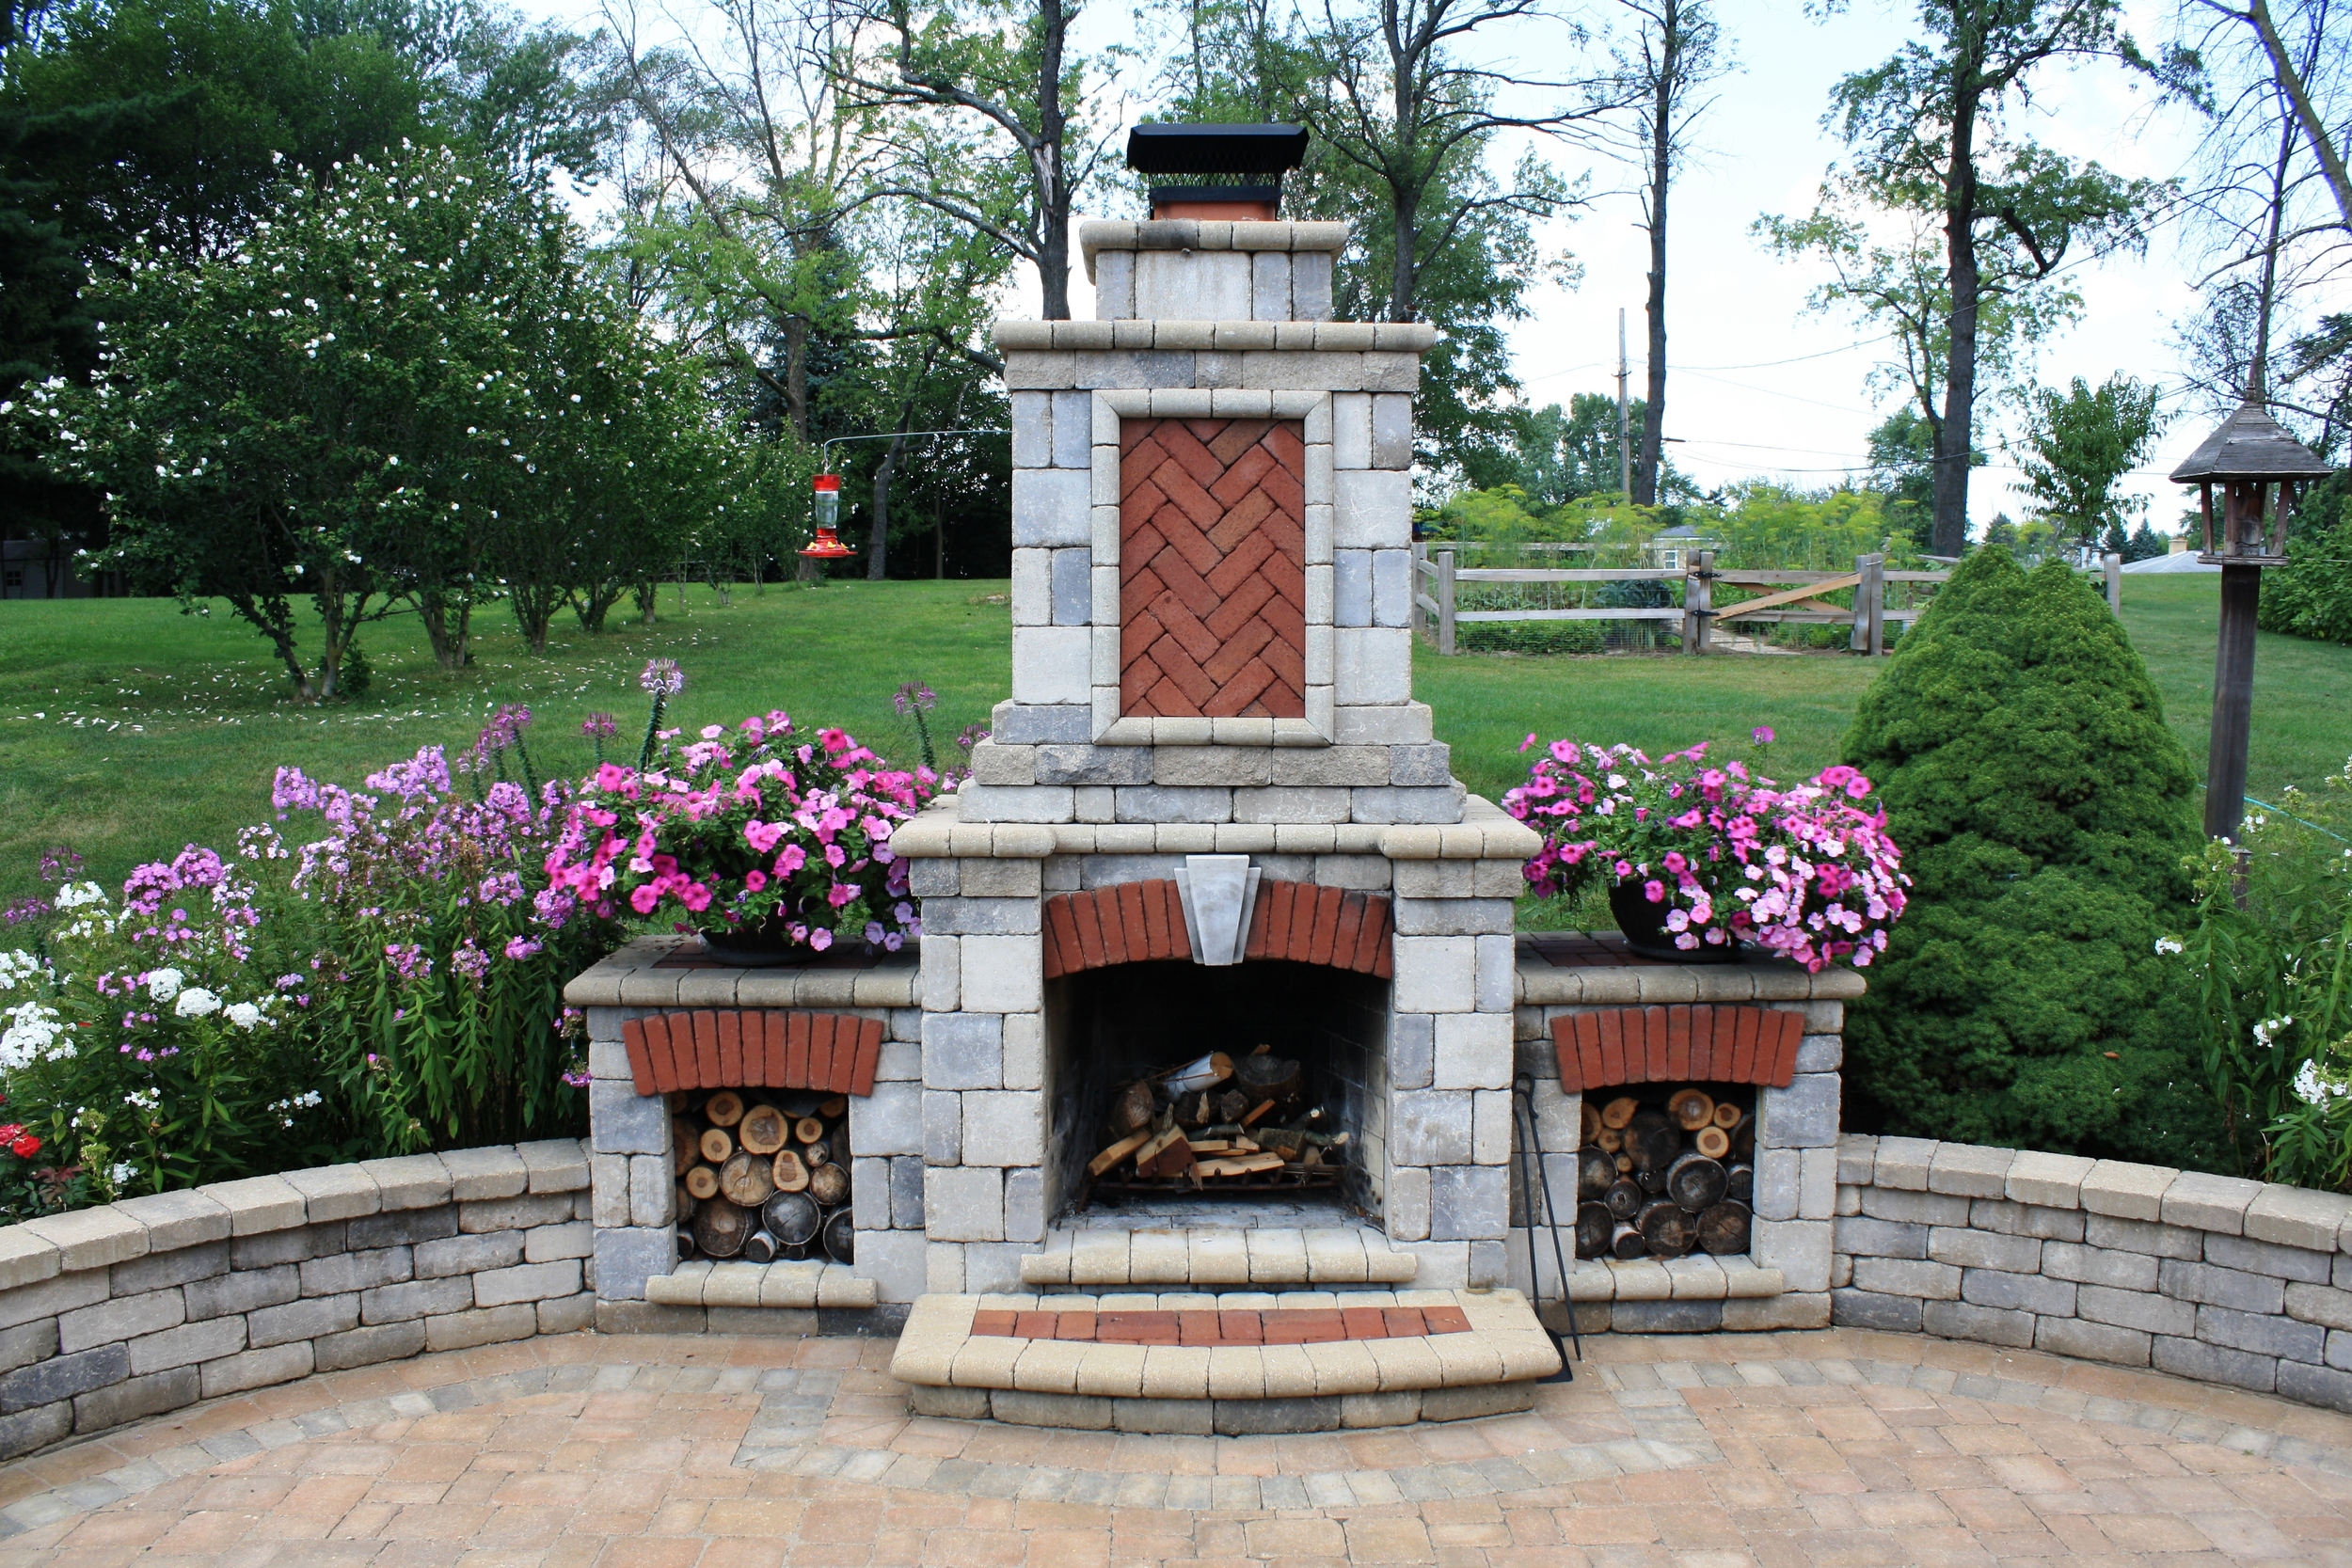  Built a beautiful outdoor fireplace, retaining wall and patio.&nbsp;Clarendon Hills, IL 